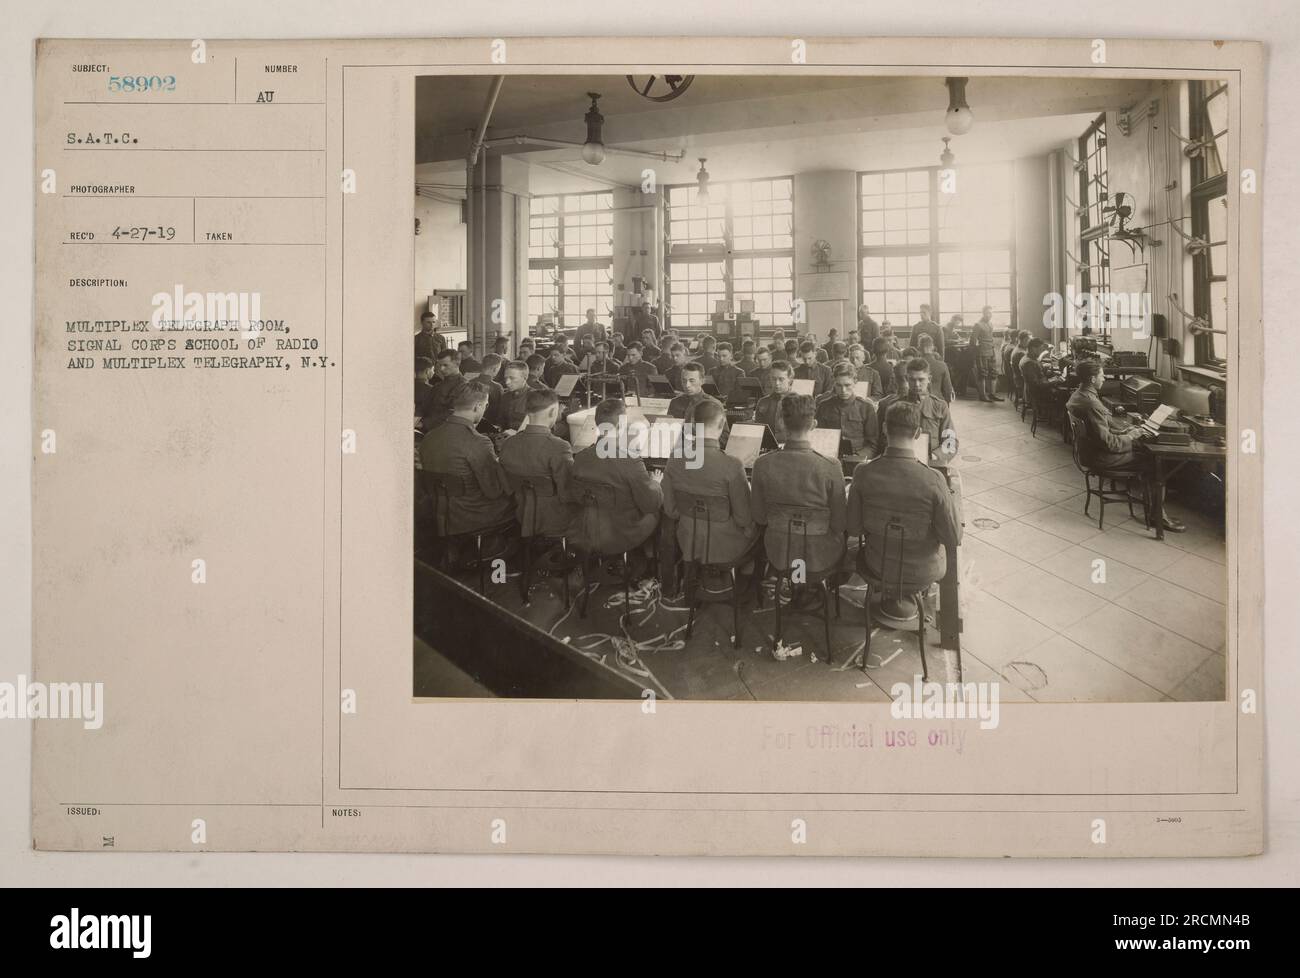 A photograph taken on April 27, 1919, in the Multiplex Telegraph Room of the Signal Corps School of Radio and Multiplex Telegraphy in New York. The image shows equipment and operators working in the room. It is labeled with the subject number 58902 and is marked for official use only. Photographer: Reed. Stock Photo